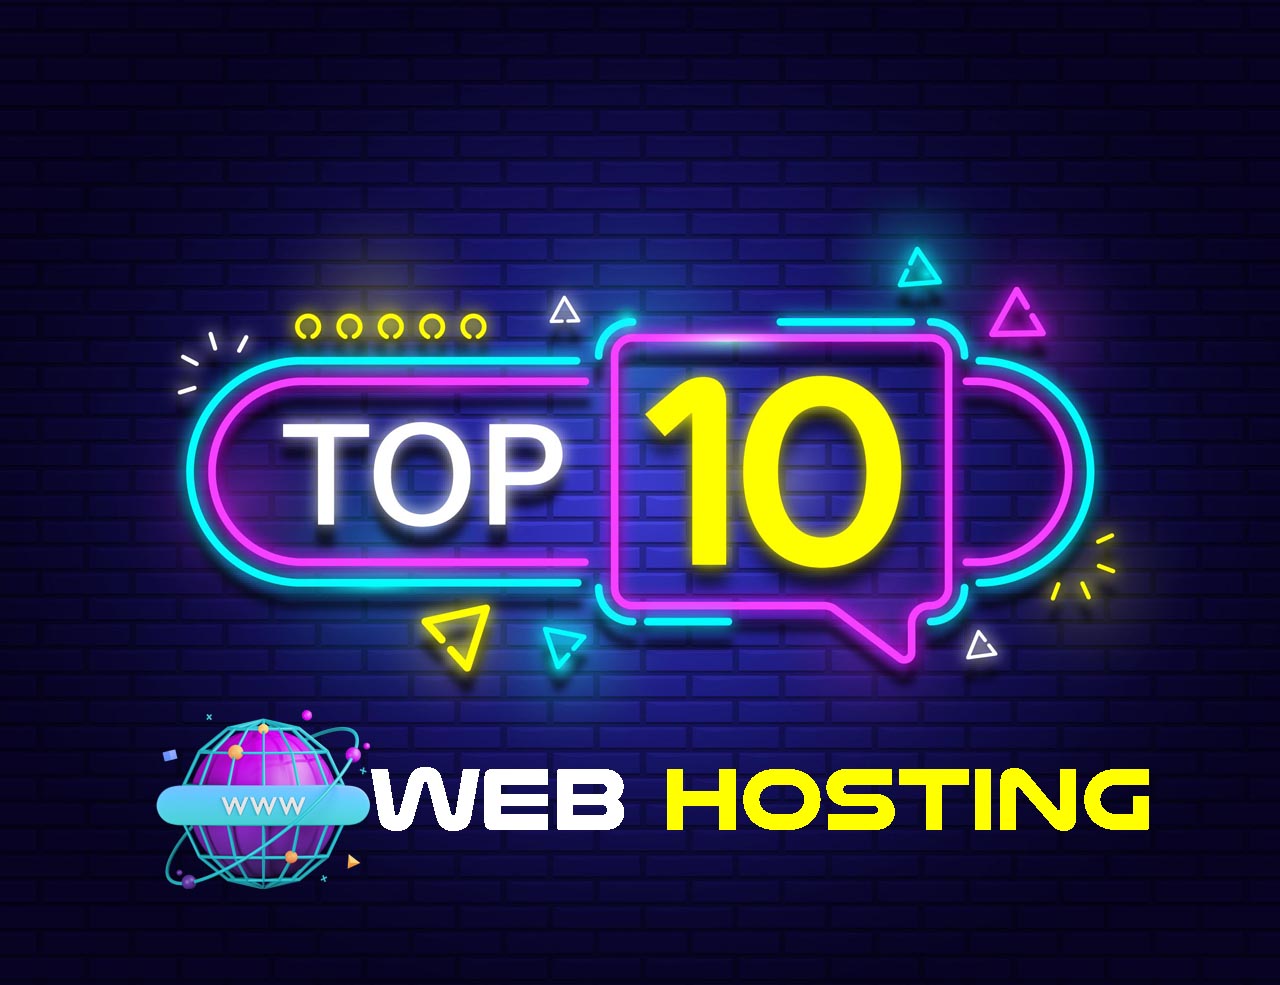 Top 10 Web Hosting in India at Cheapest Price